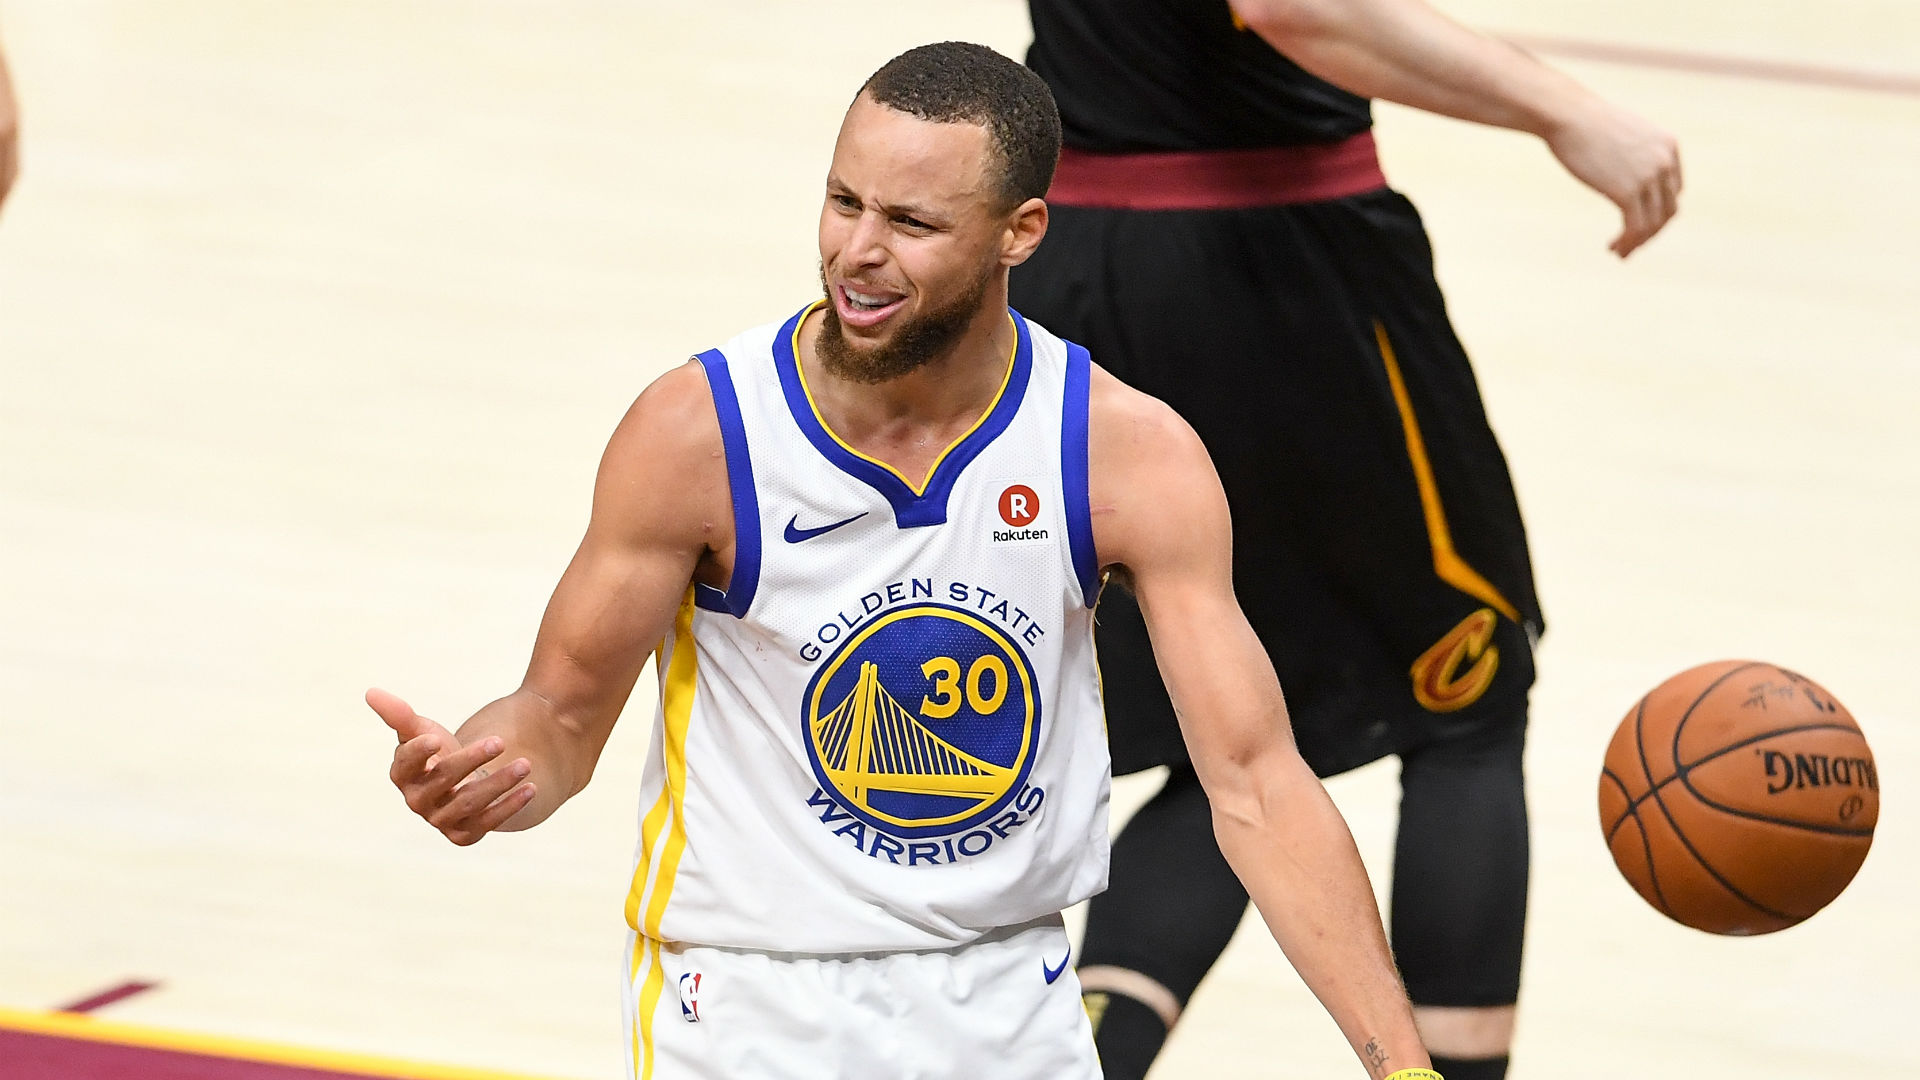 Stephen Curry asserted the moon landing was faked while appearing on Vince Carter and Kent Bazemore's "Winging It" podcast on Monday.